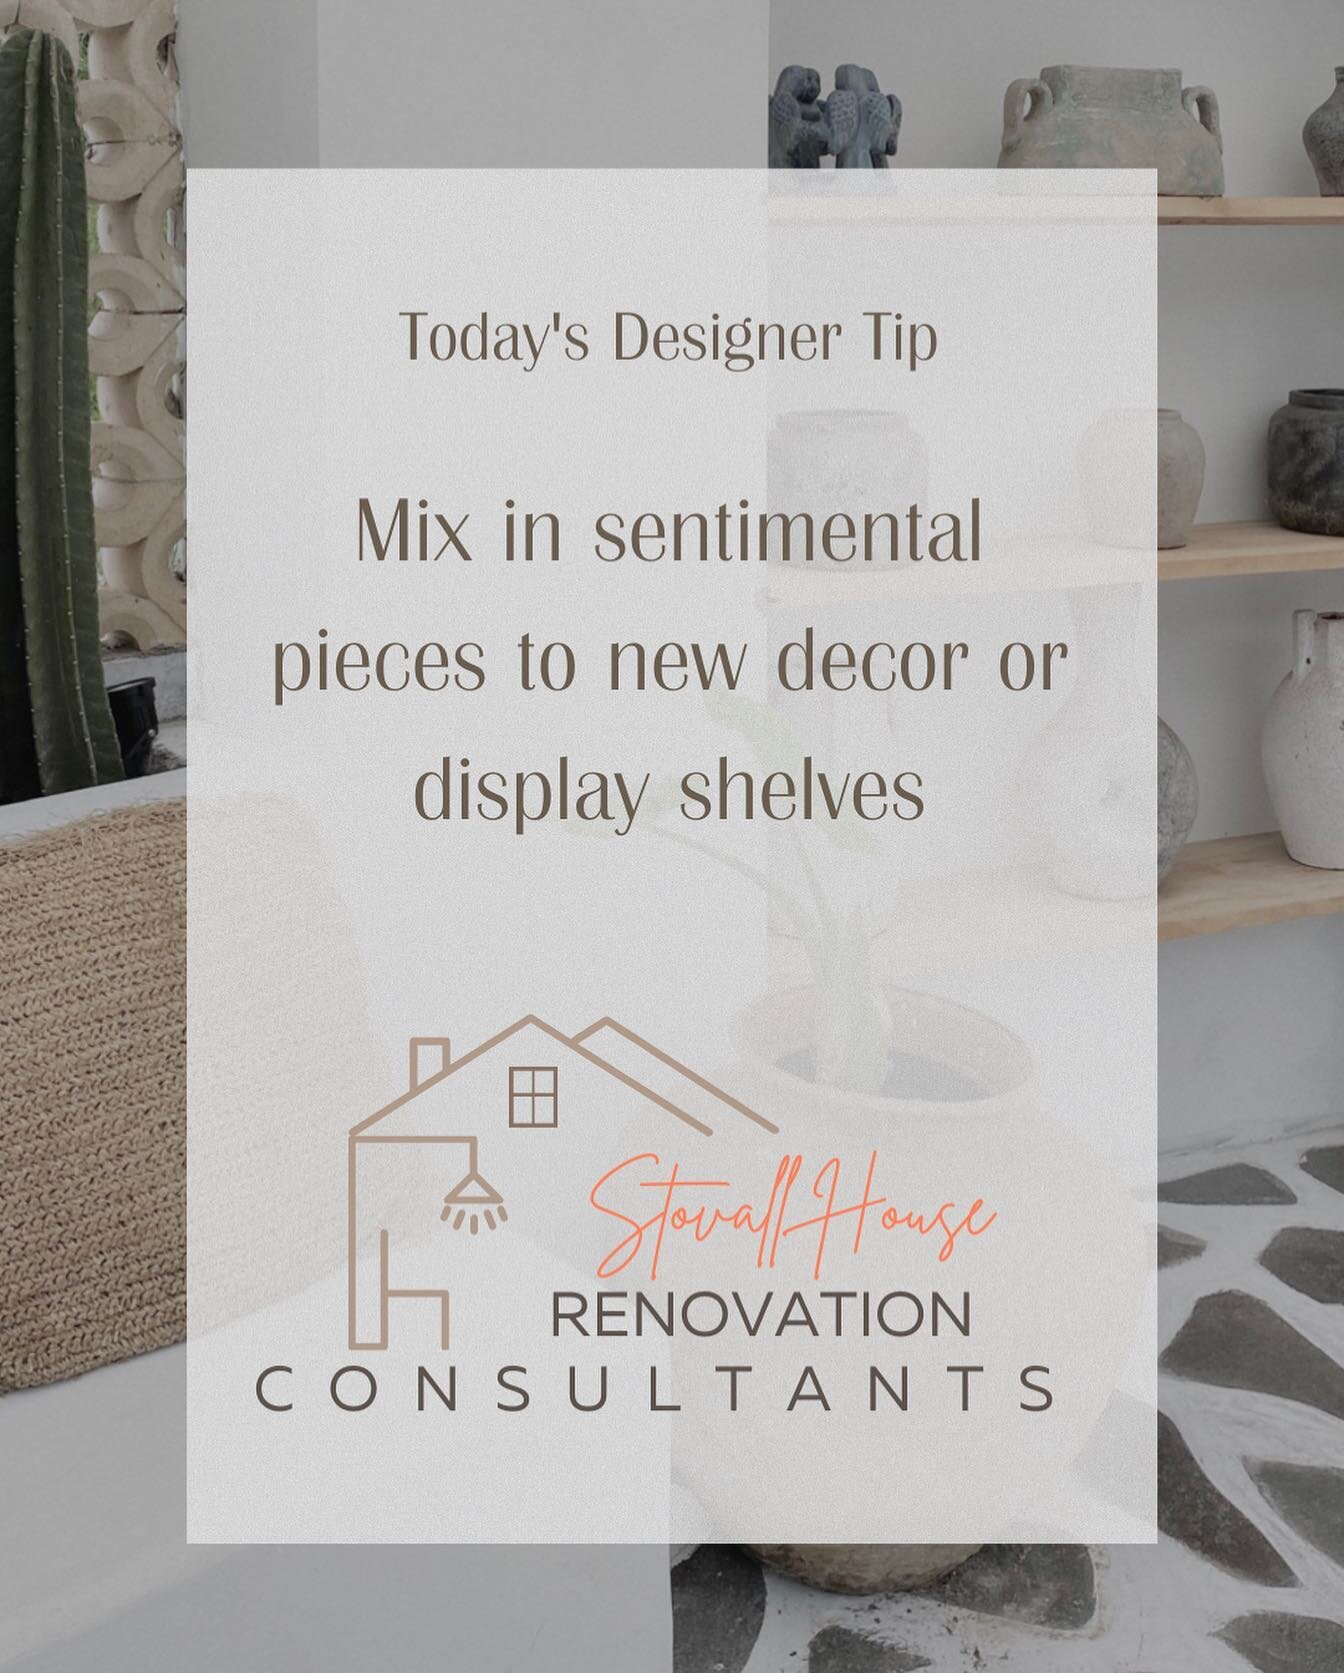 Incorporate sentimental items into your new decor or display shelves to add a personal touch and create a more meaningful space.

Here are some ideas to help you mix sentimental pieces into your new decor or display shelves:

Use picture frames to di